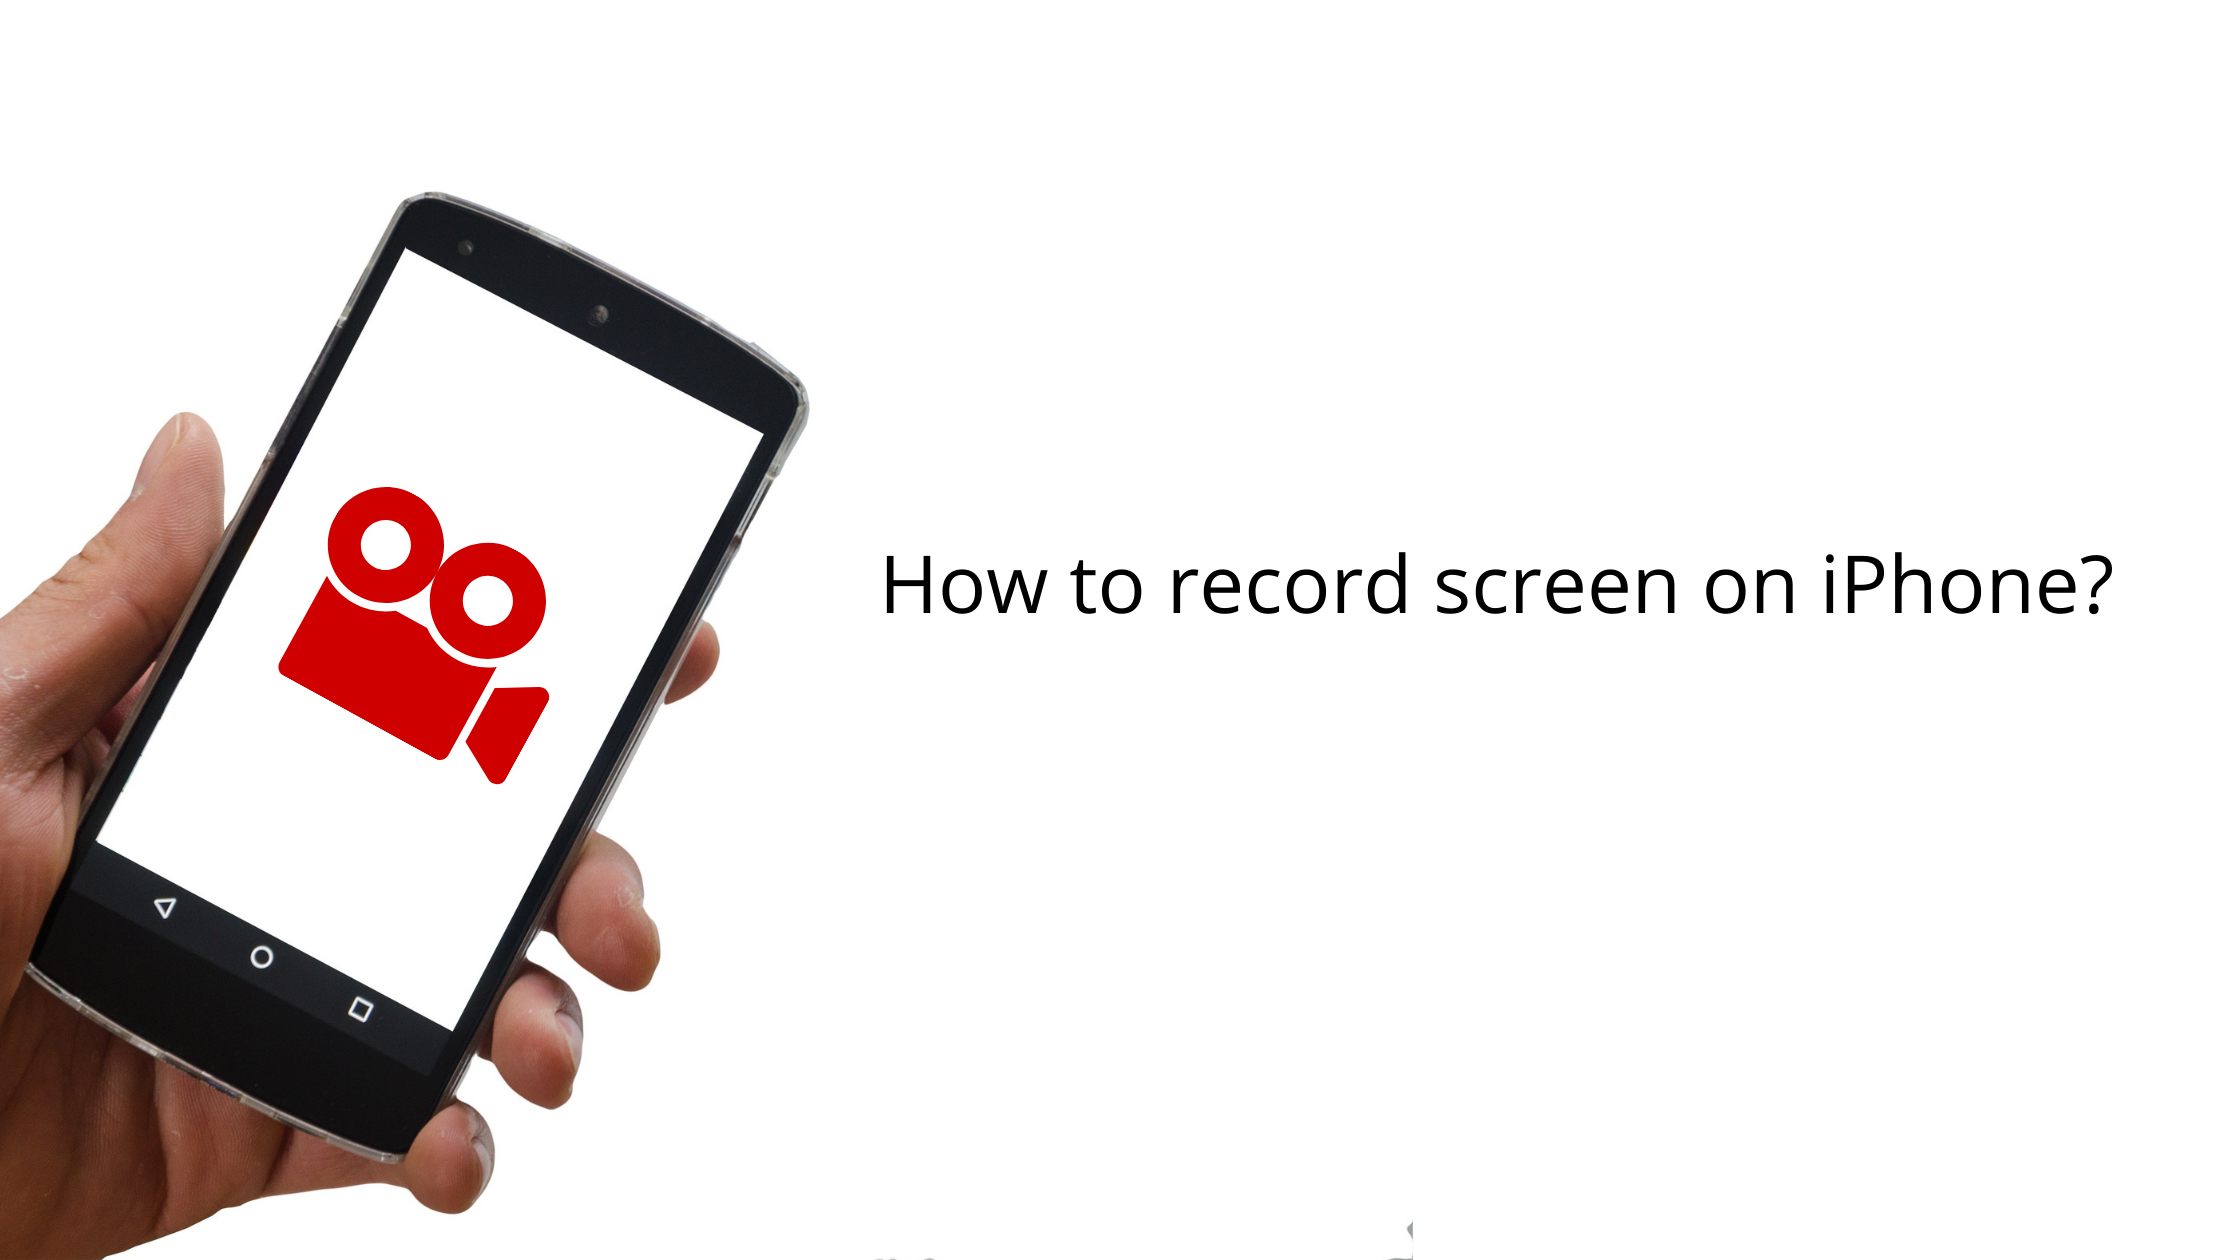 How to record screen on iPhone?